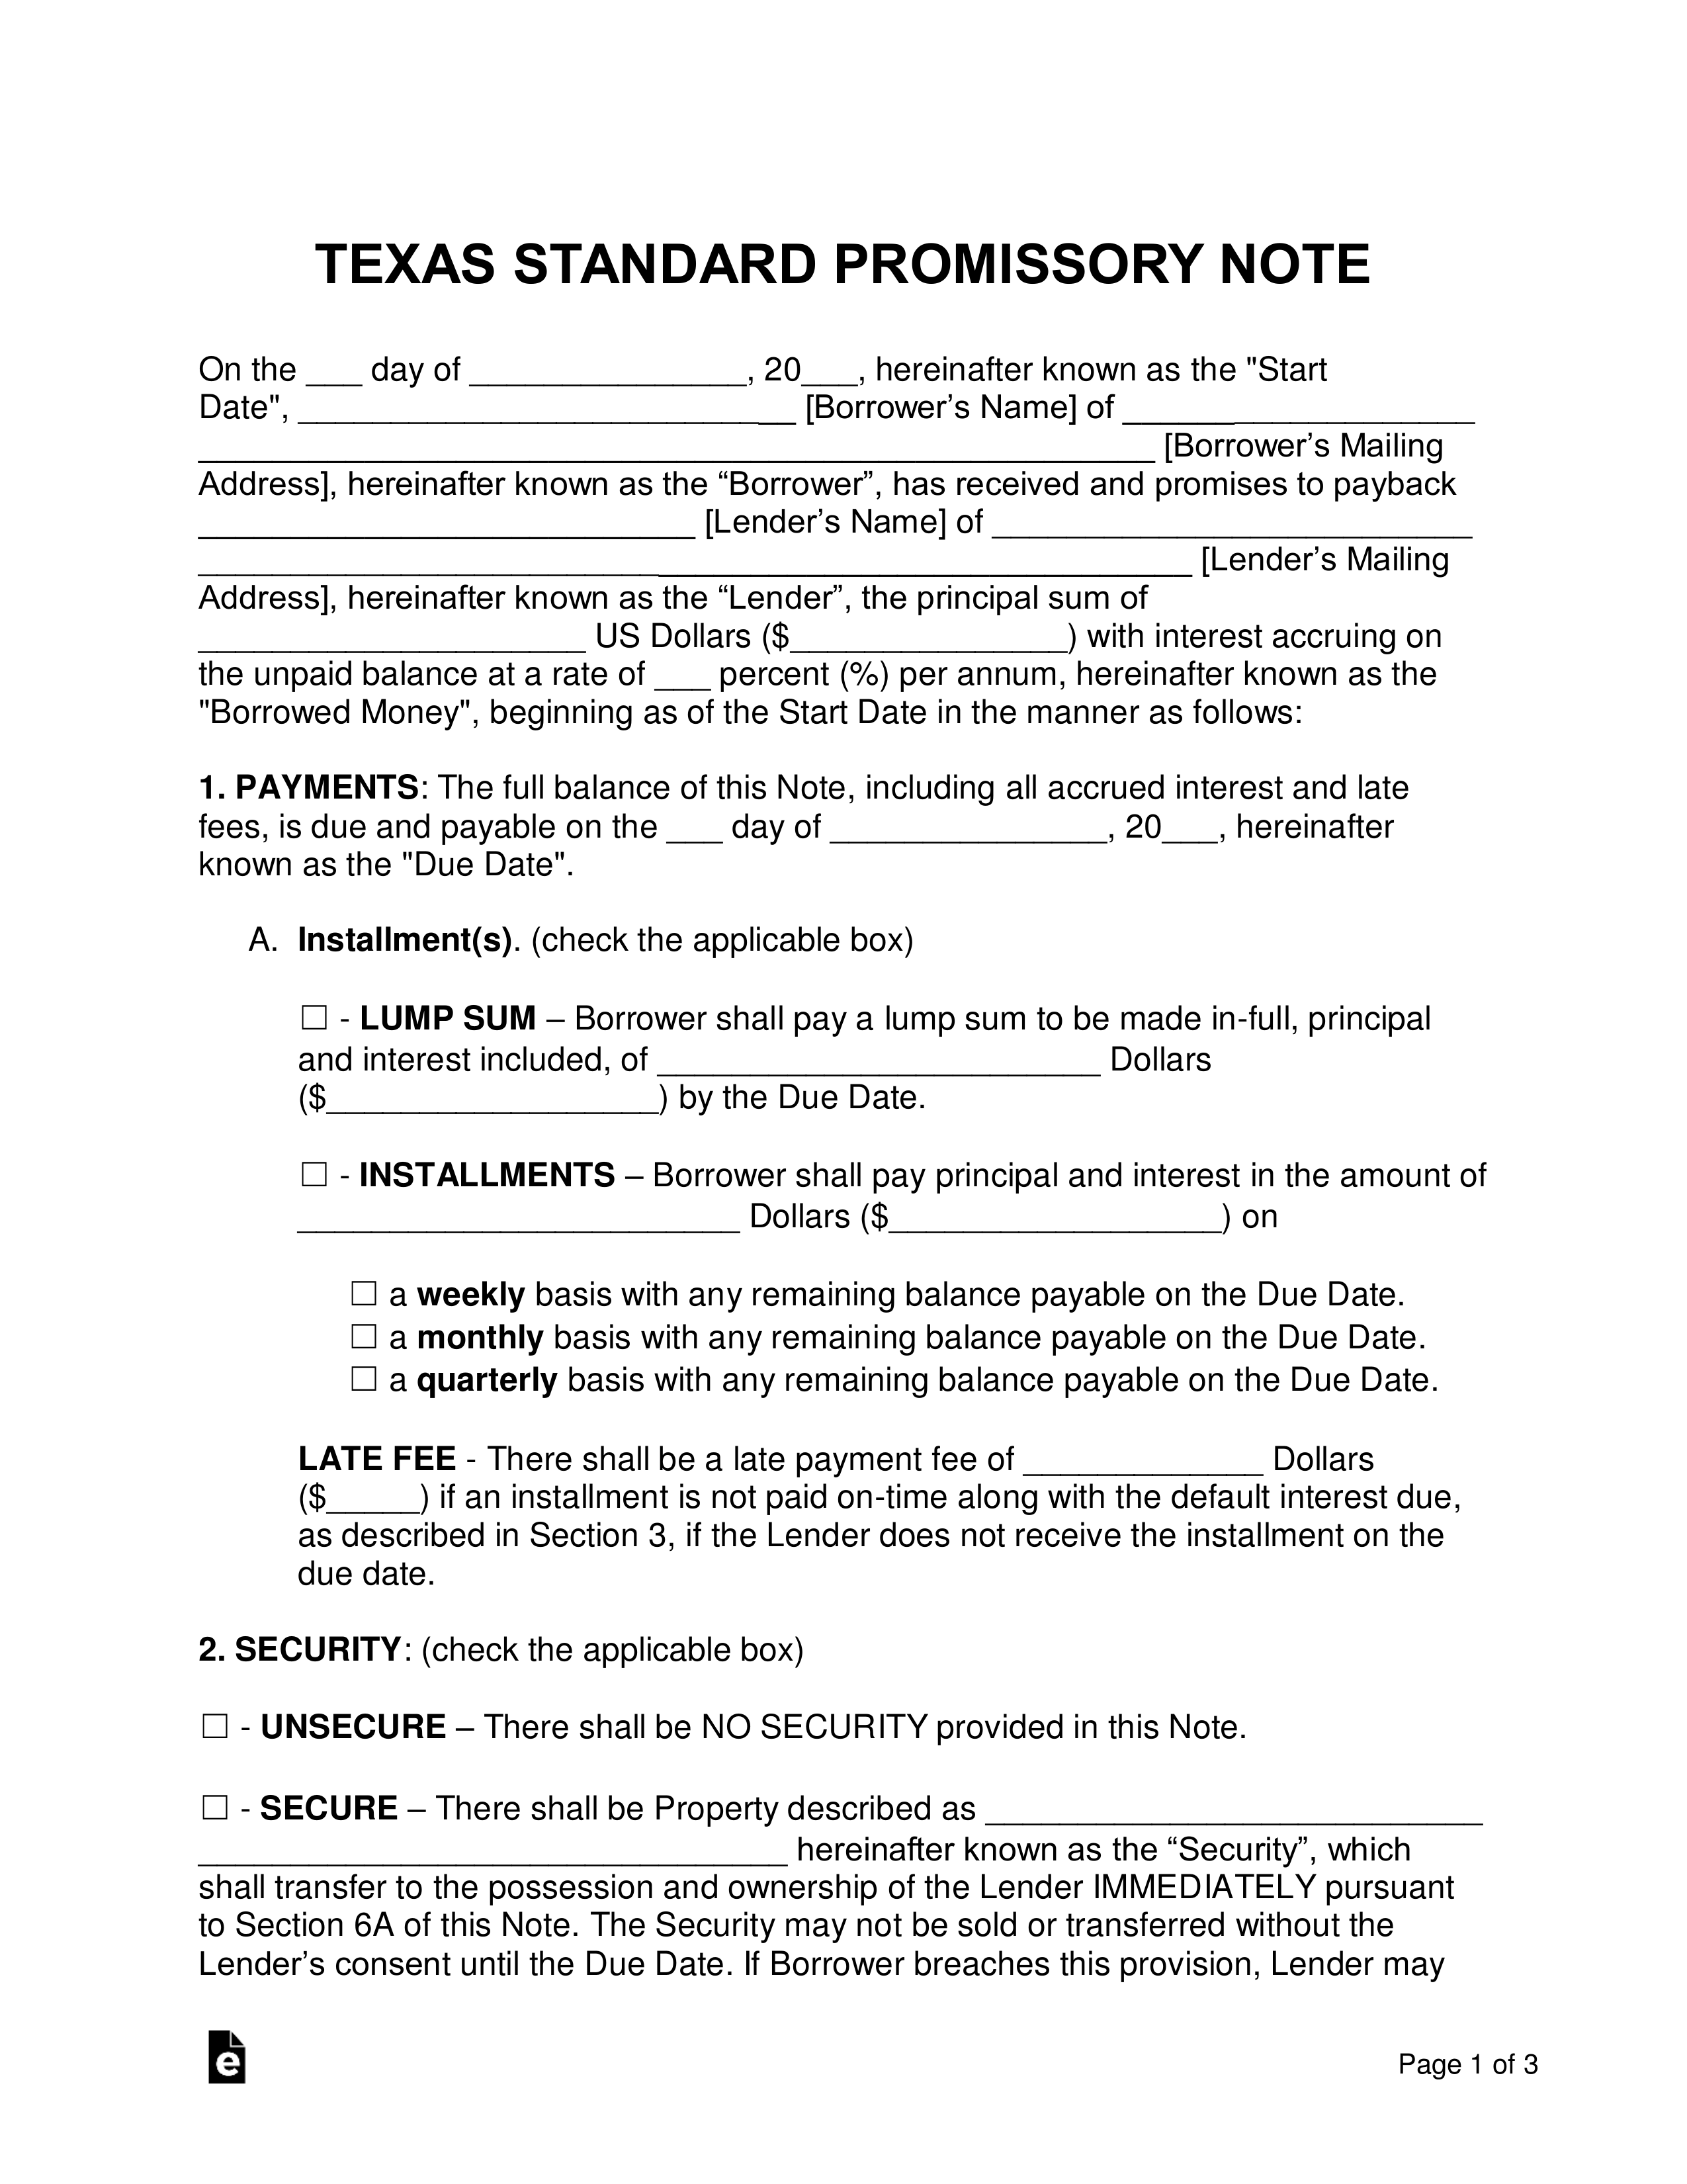 21 year mortgage rates today texas Regarding Unsecured Promissory Note Template